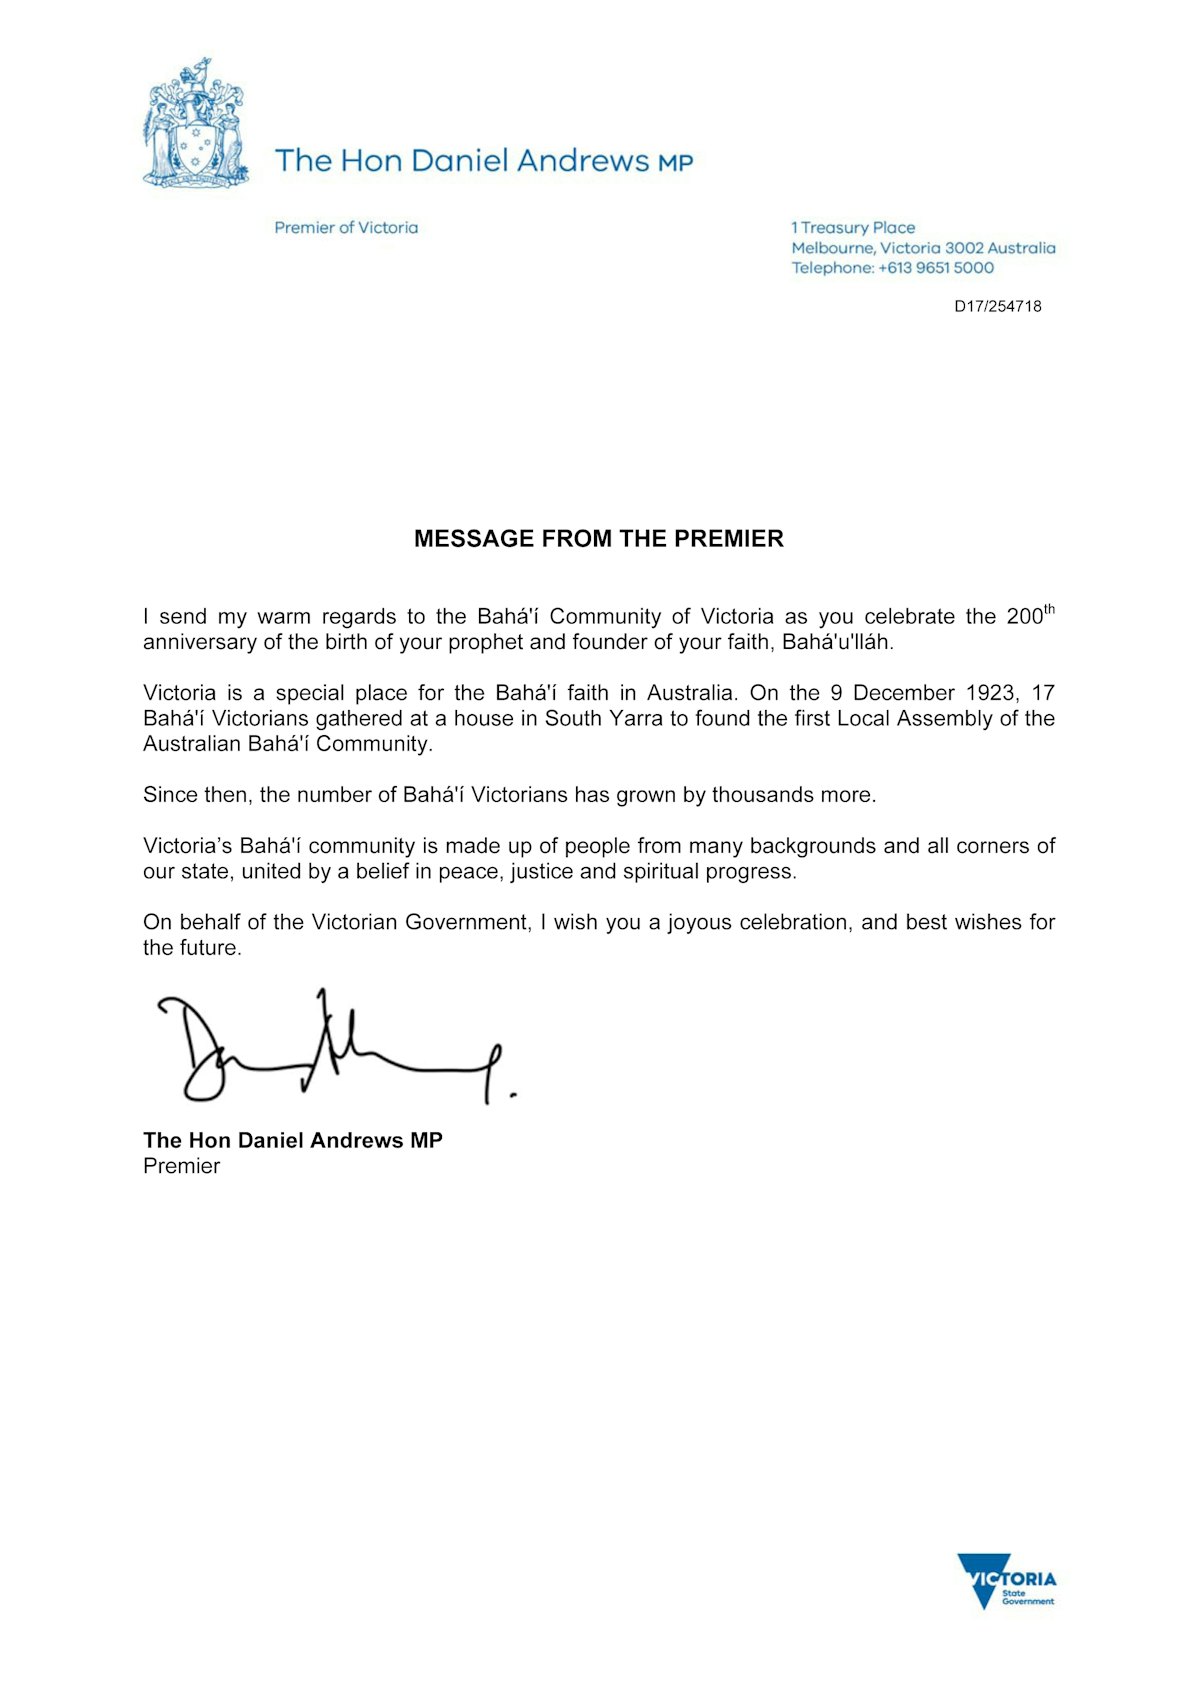 A message to the Baha’i community from Daniel Andrews, Premier of Victoria